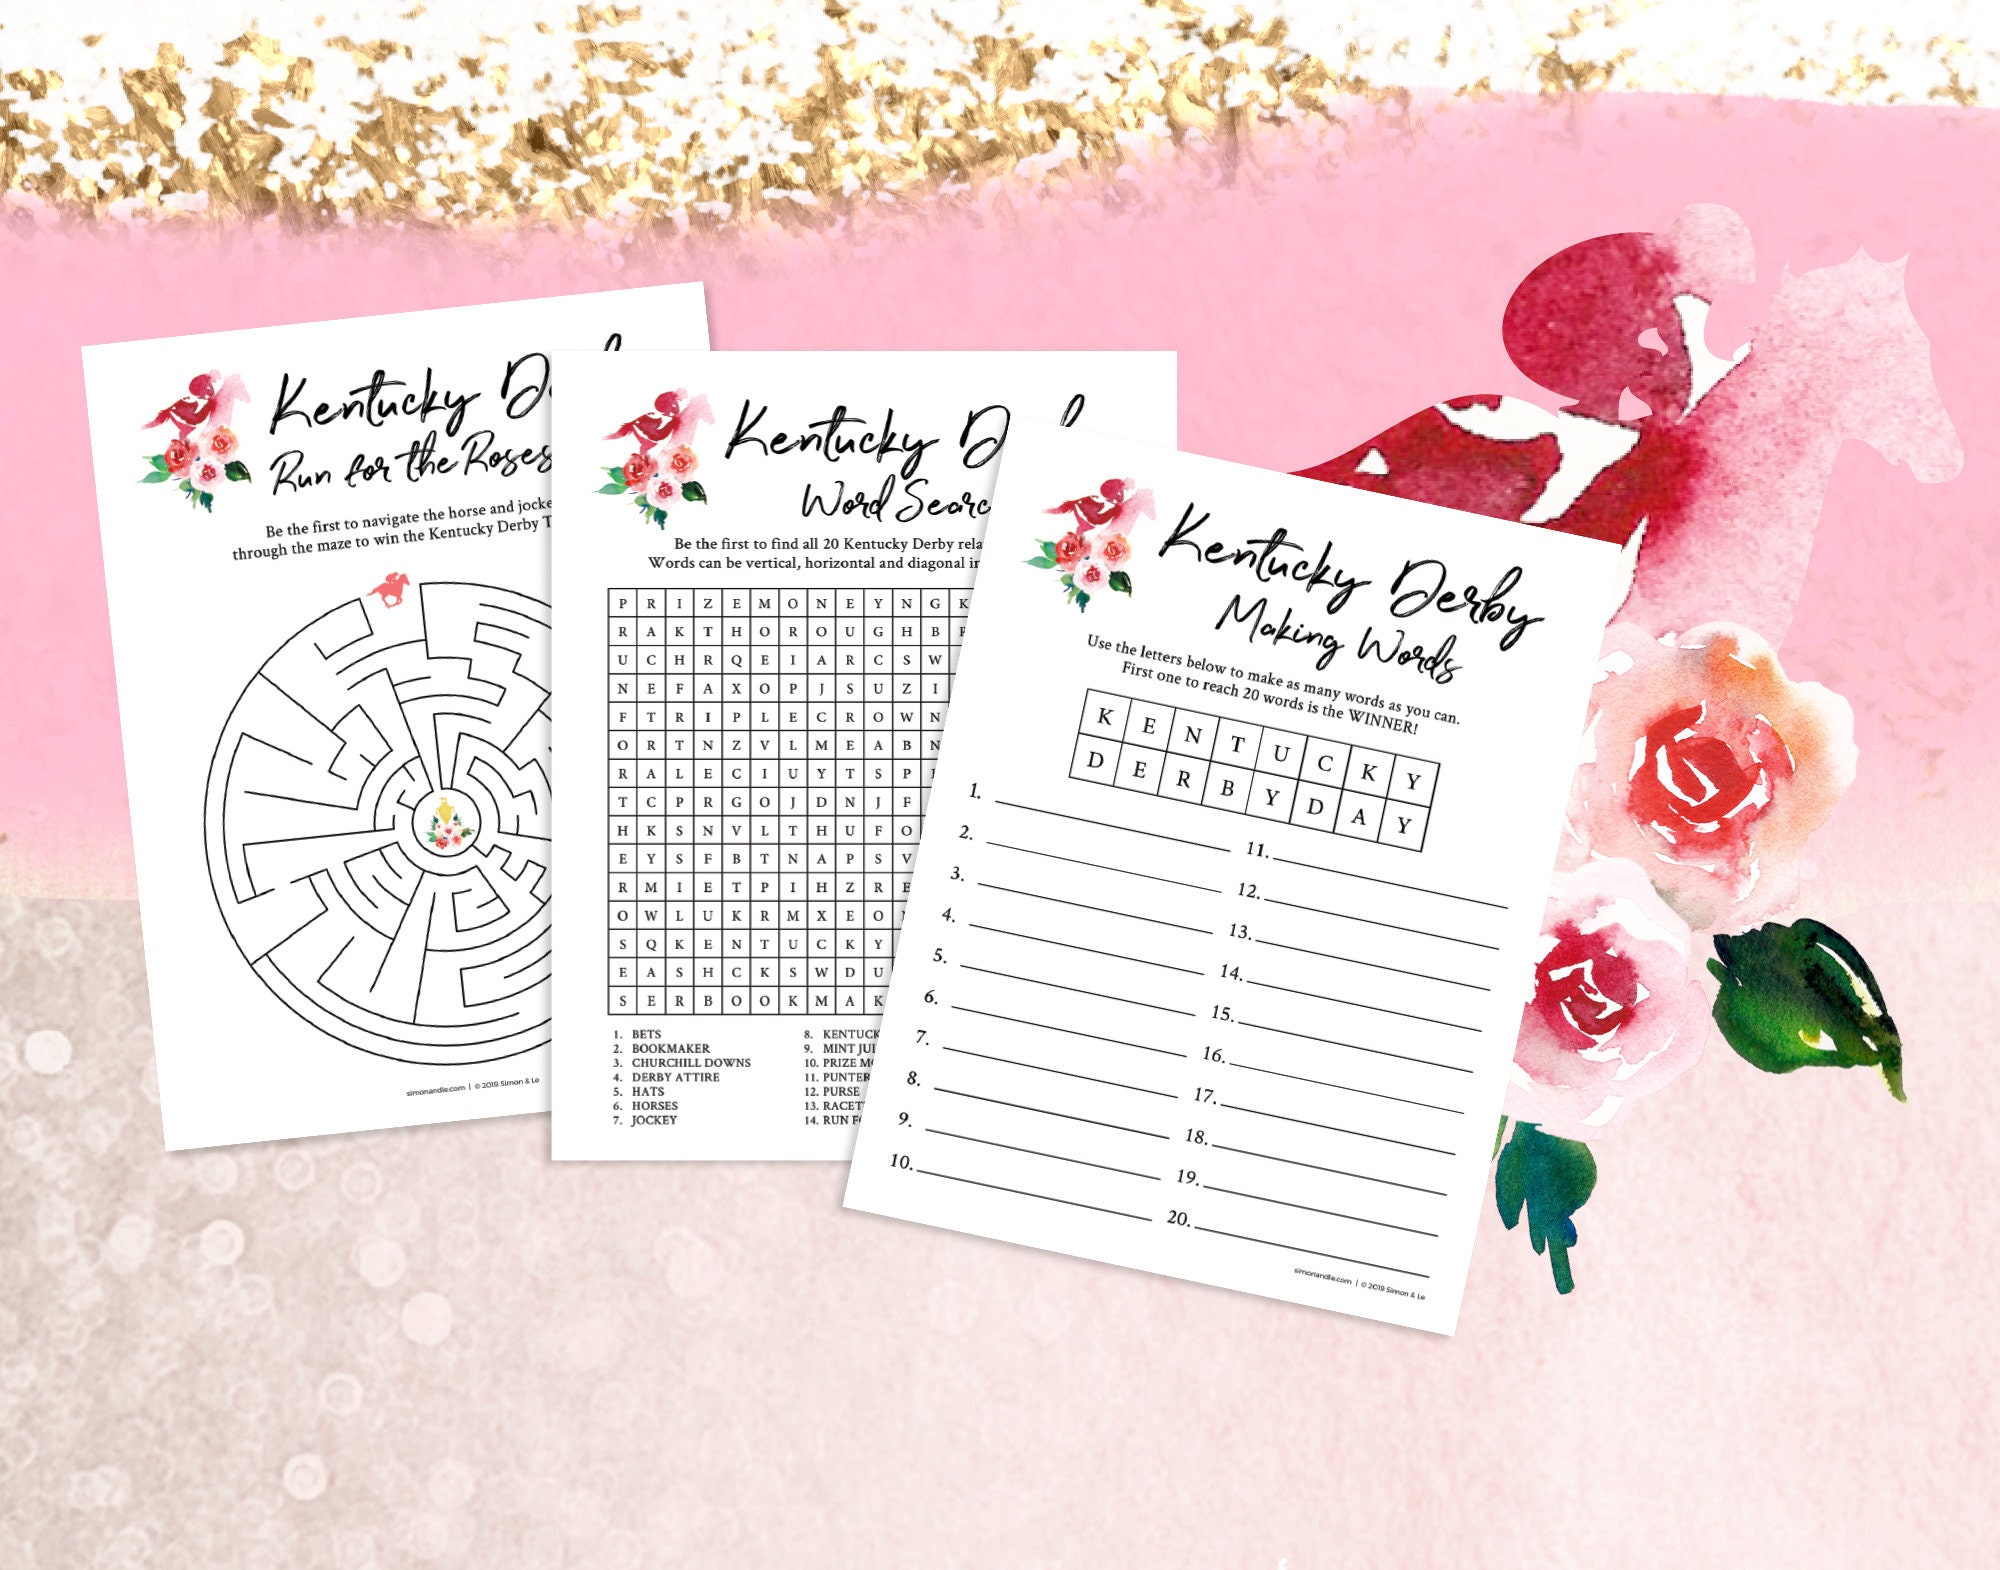 Kentucky Derby Party Games Printable Word Search Maze Etsy